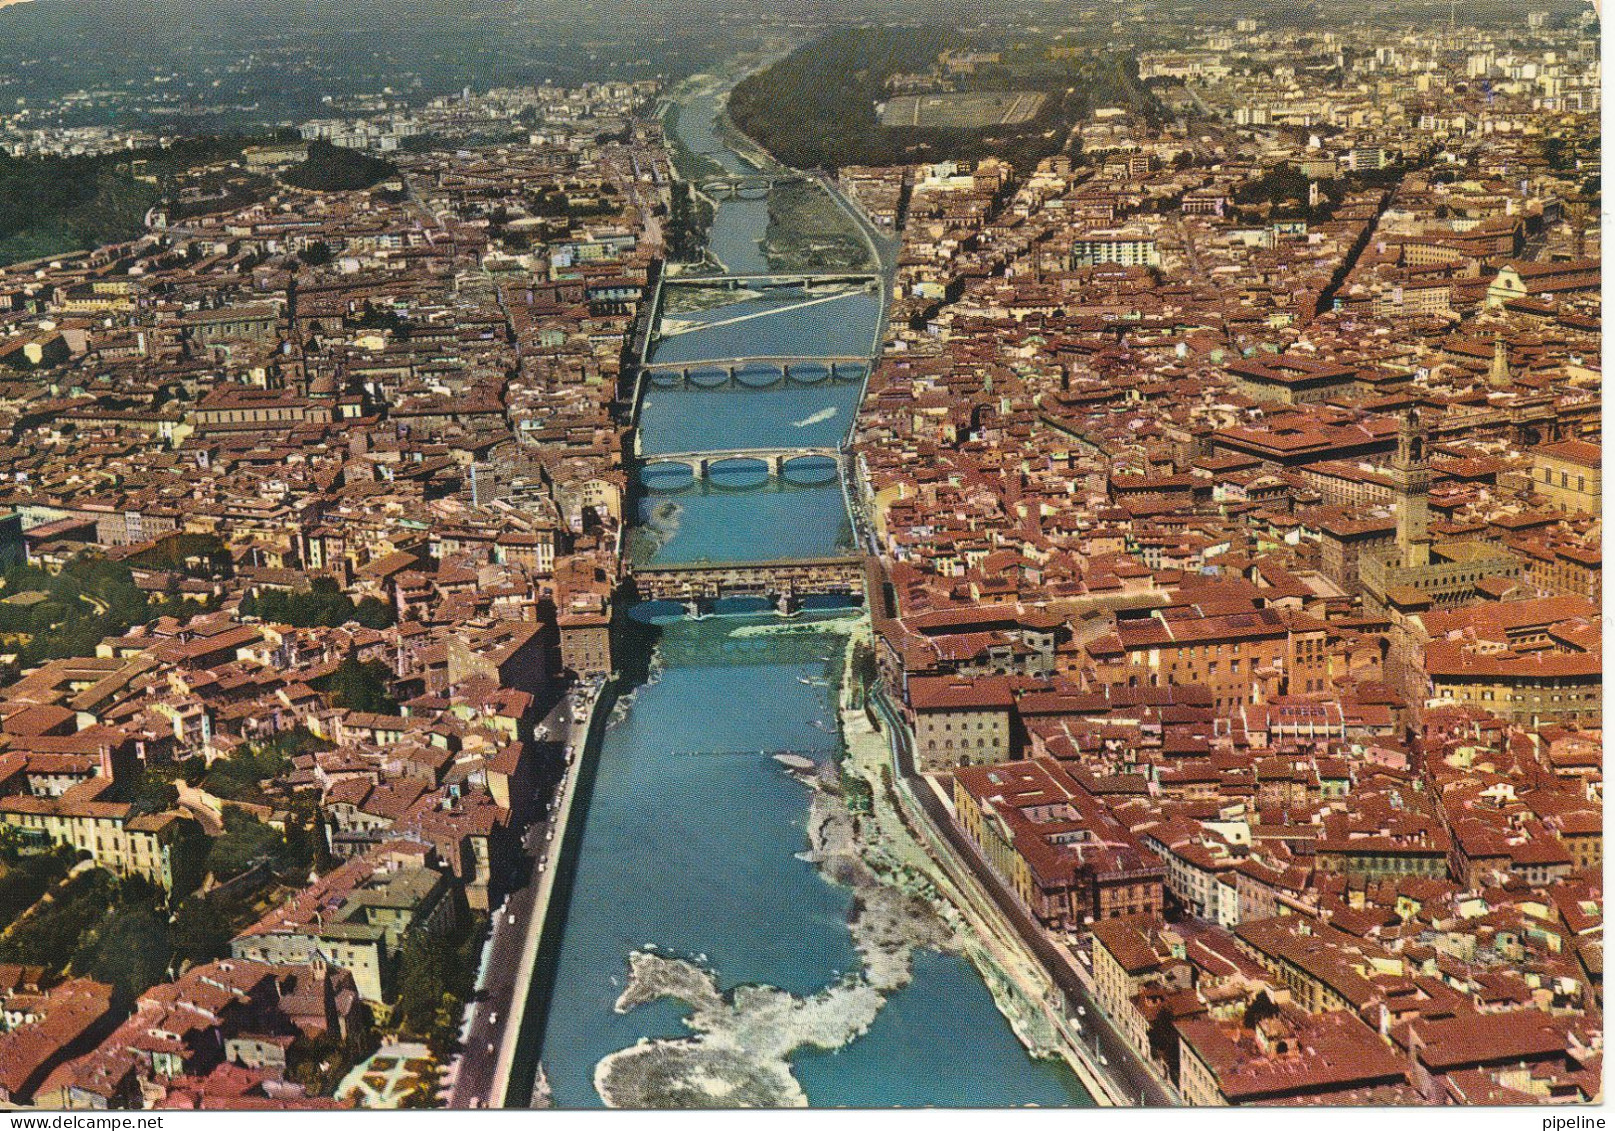 Italy Postcard Sent To Switzerland 4-6-1973 (Firenze Panorama From The Aeroplane) - Firenze (Florence)